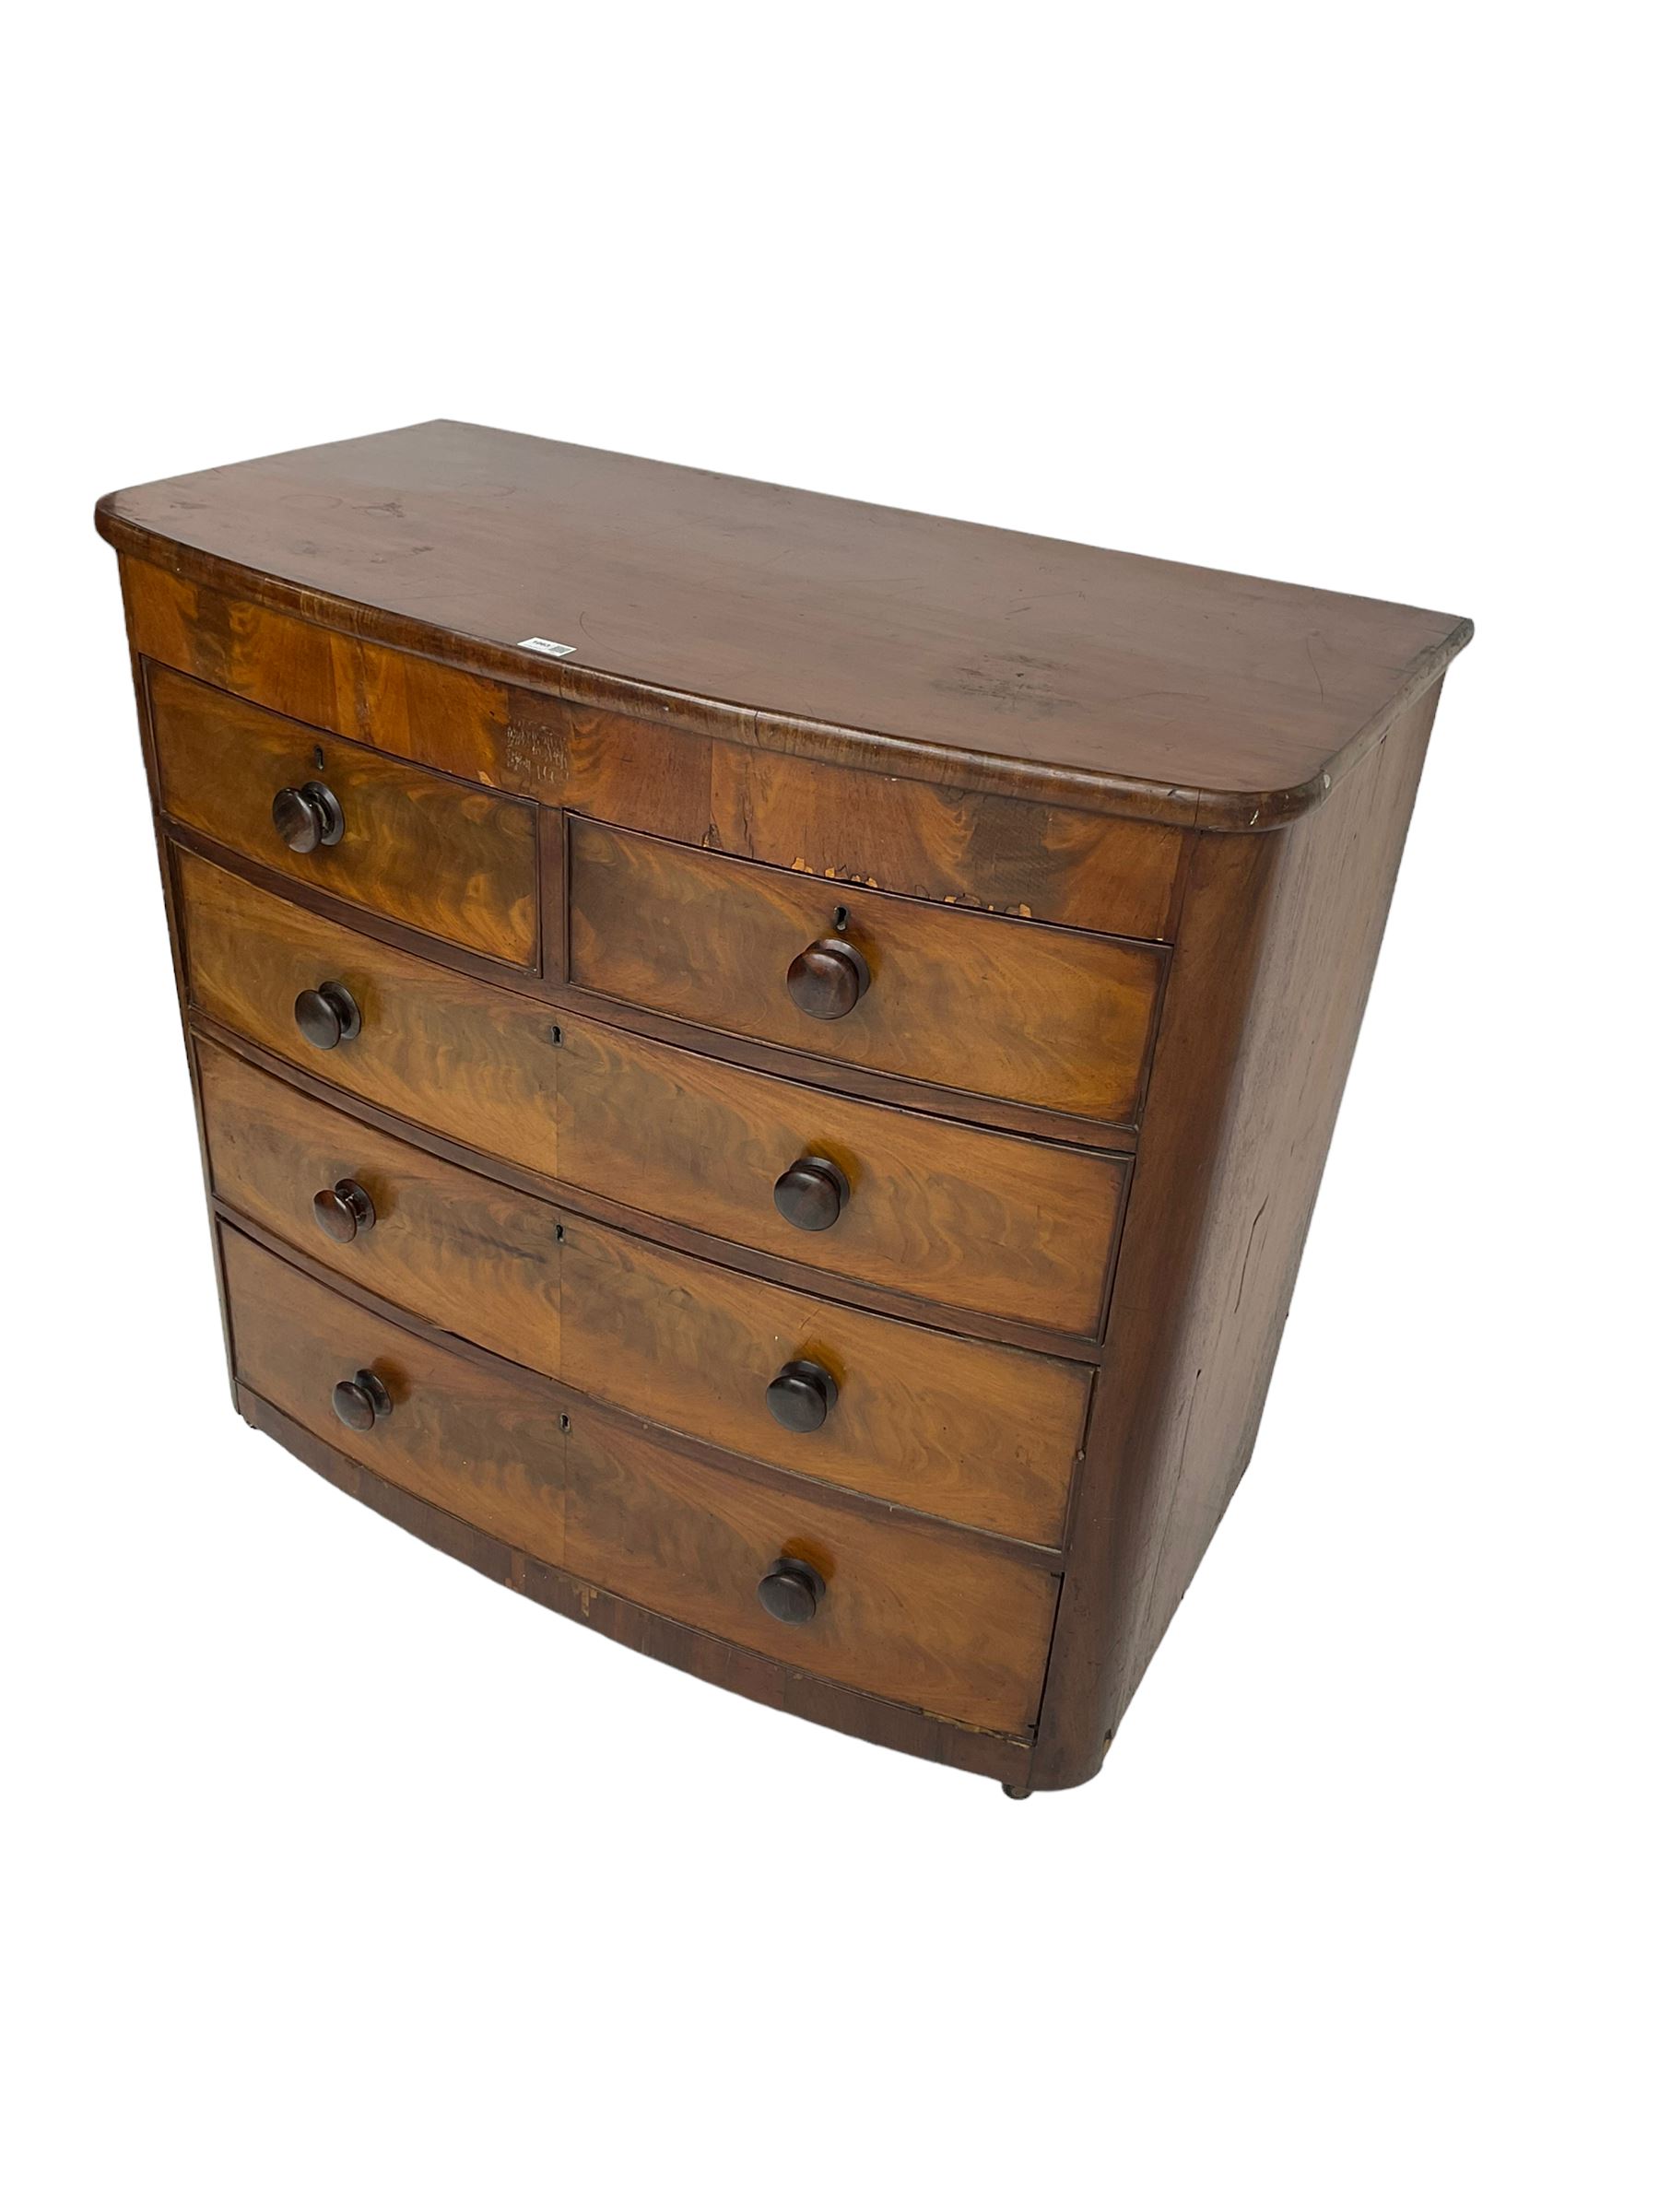 Late 19th century mahogany bow front chest - Image 3 of 7